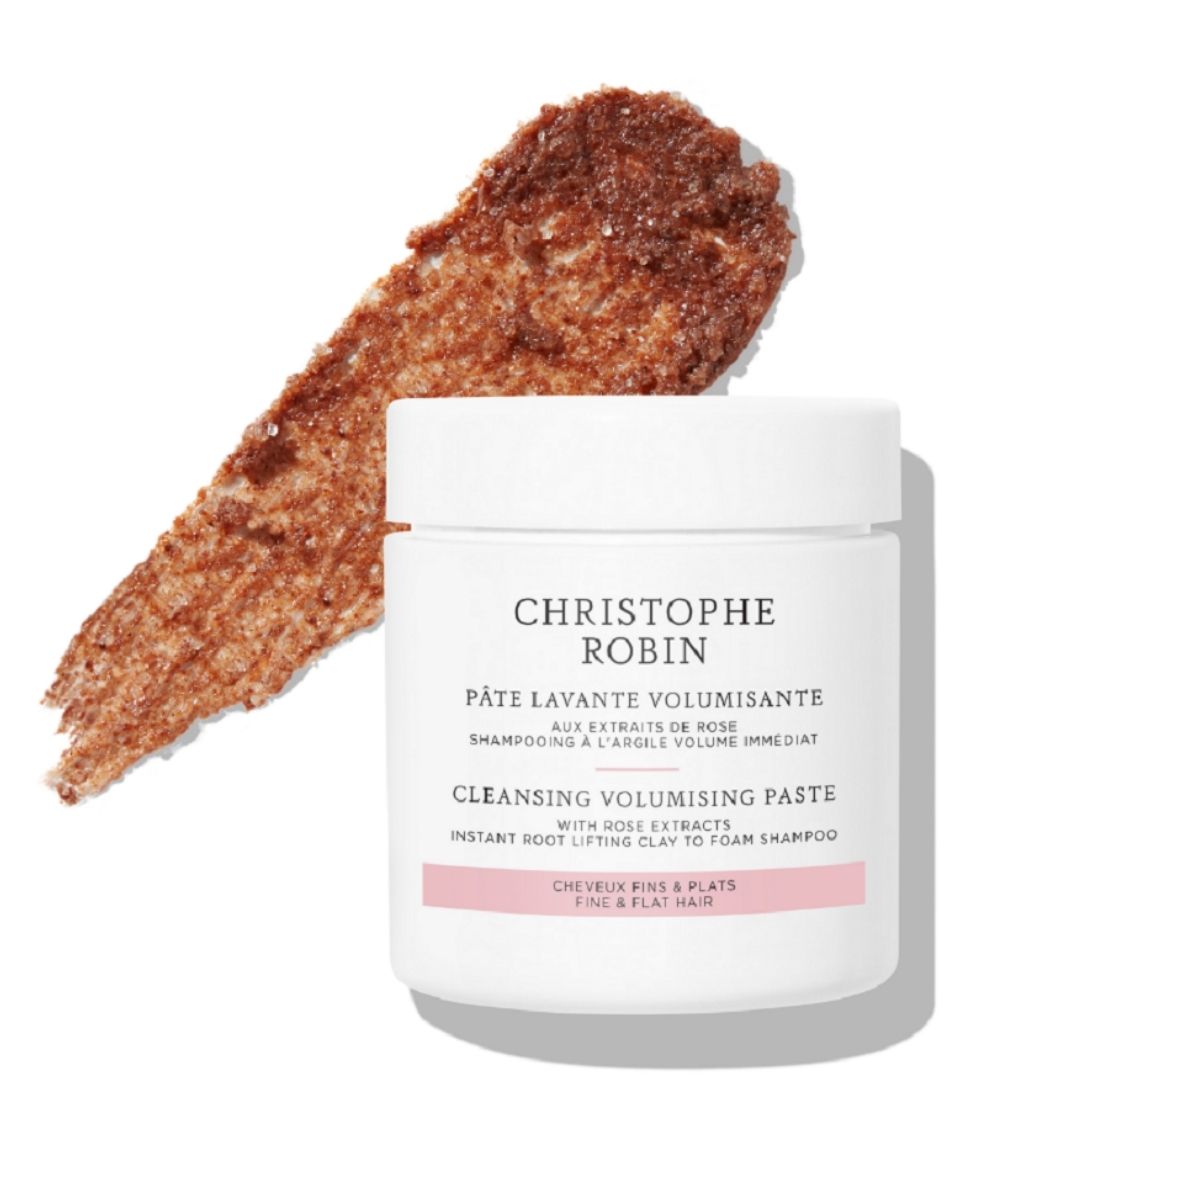 Christophe Robin Cleansing Volumizing Shampoo Paste with Rassoul Clay & Rose Extracts